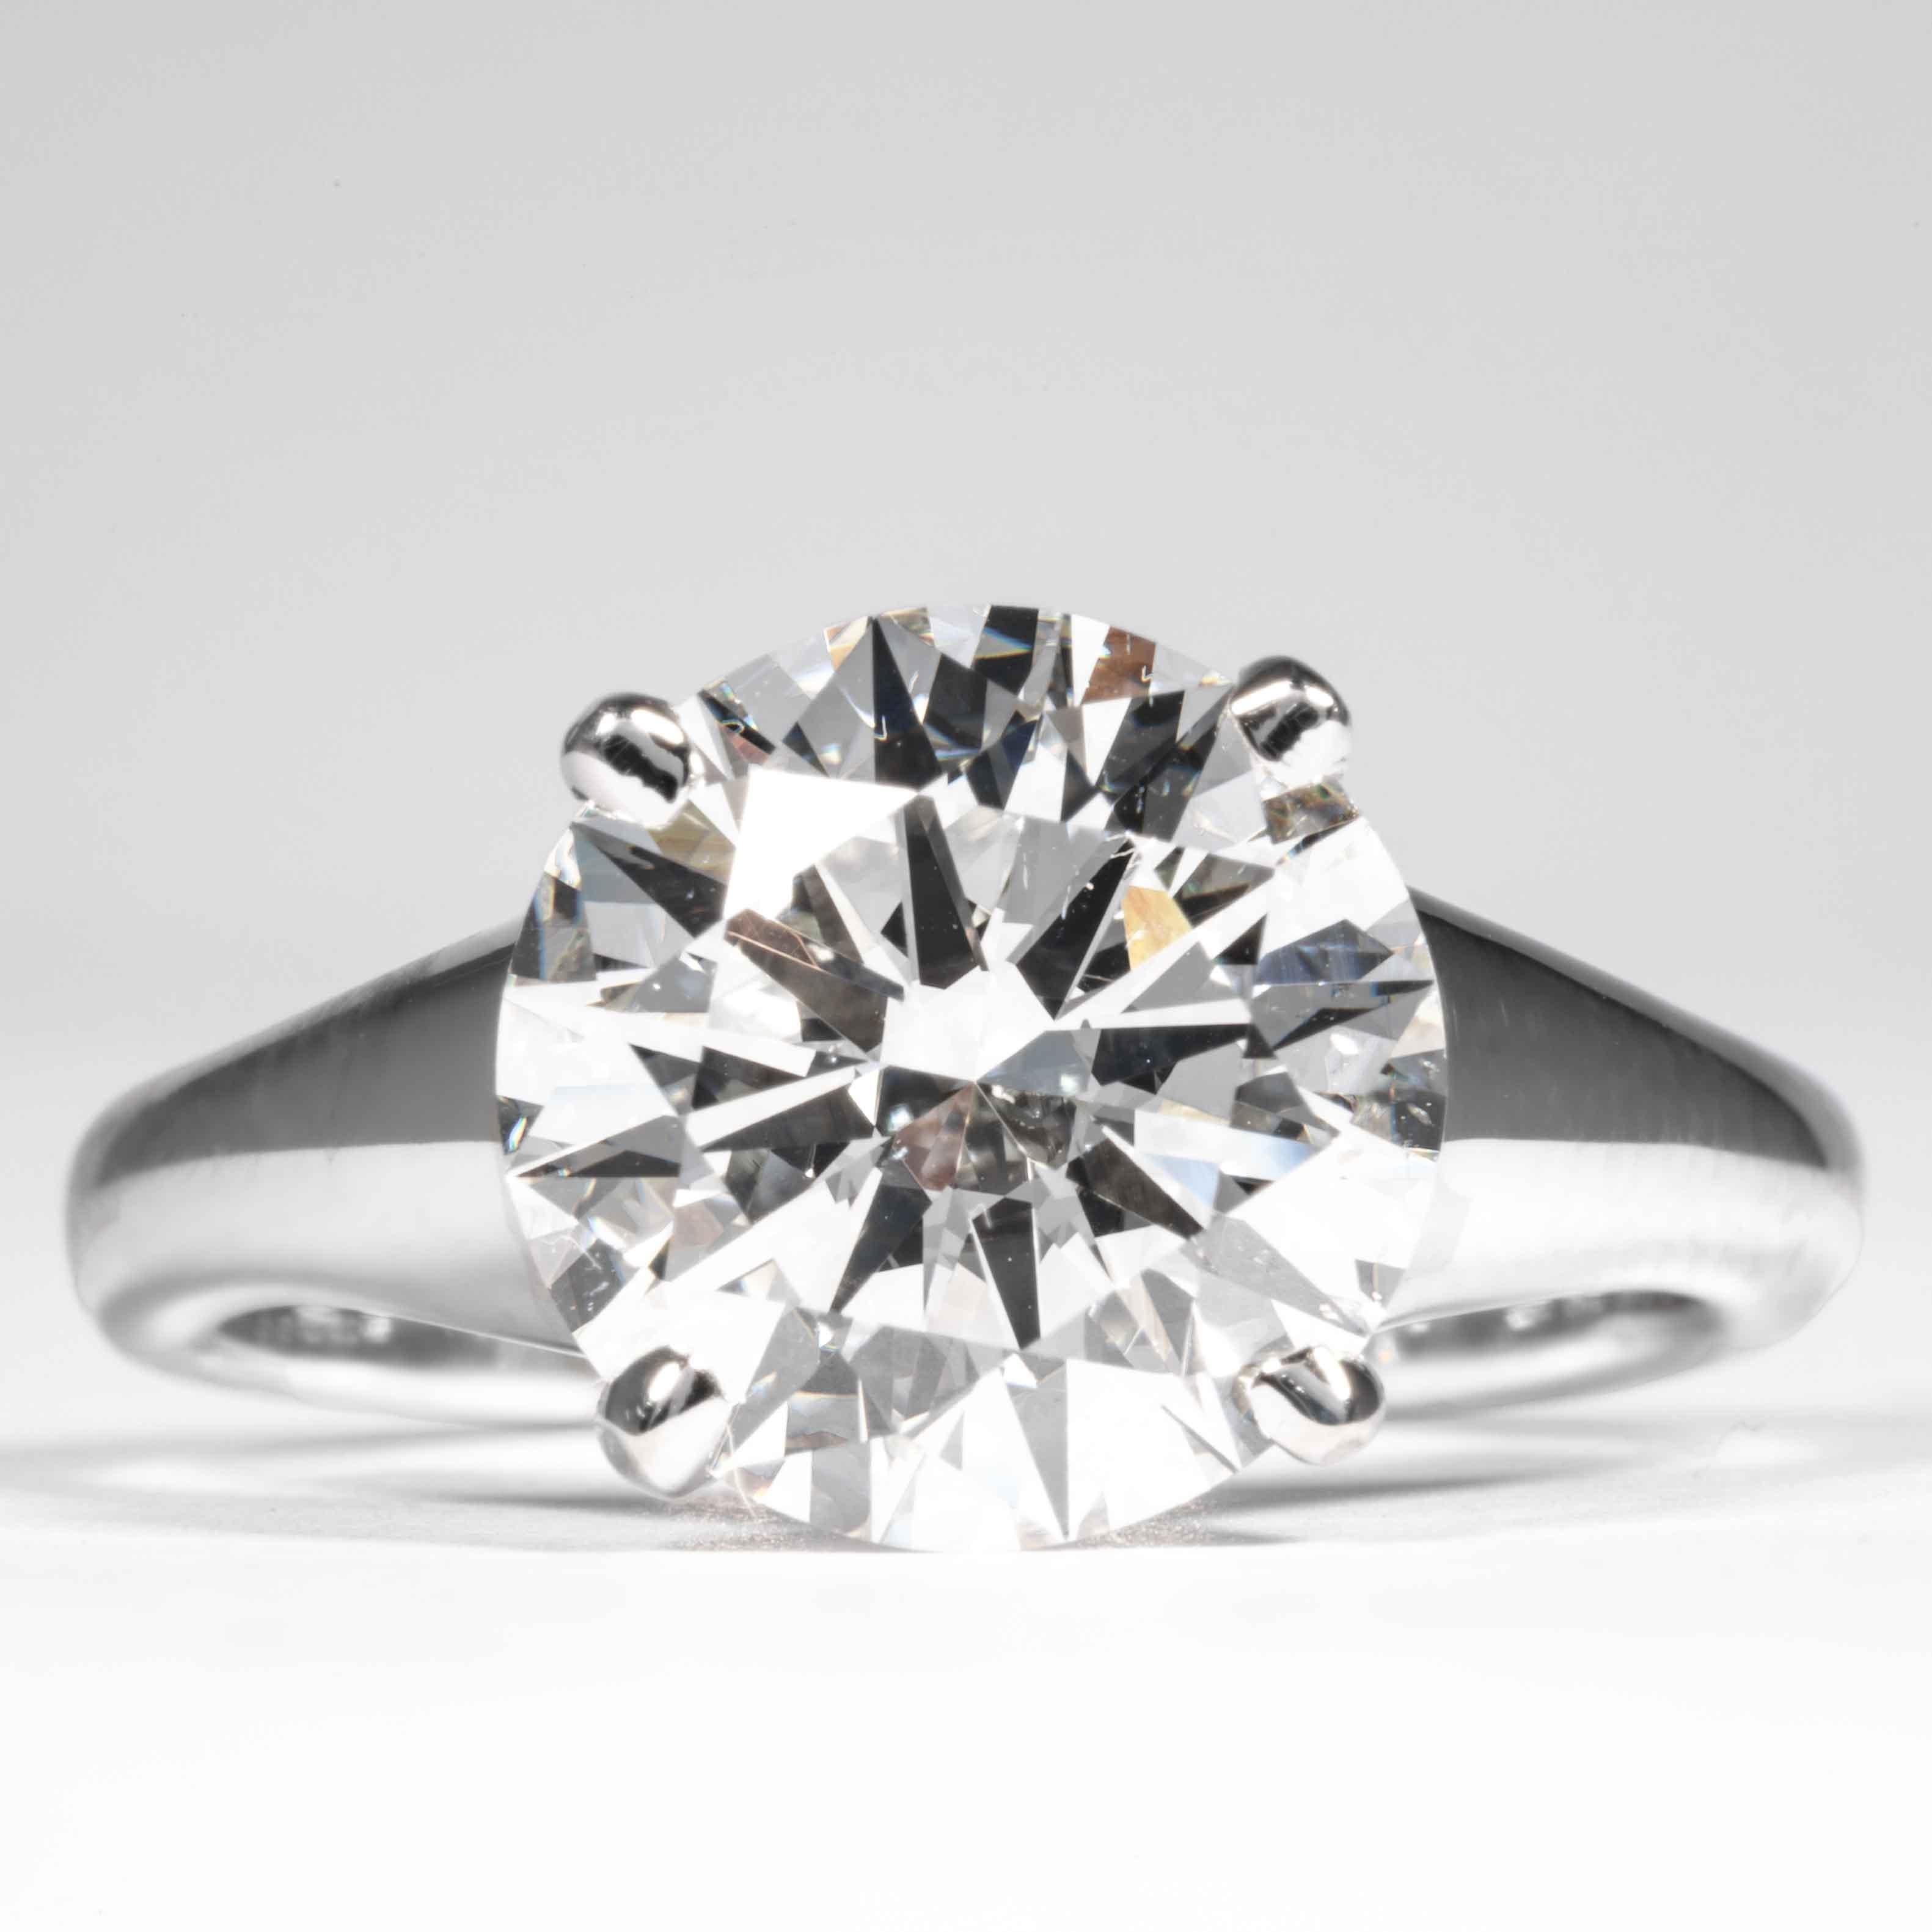 This elegant and classic diamond ring is offered by Shreve, Crump & Low. This 4.26 carat GIA certified H S1 round brilliant cut diamond measuring 10.47 x 10.53 x 6.30 mm is custom set in a handcrafted Shreve, Crump & Low 4-prong platinum solitaire